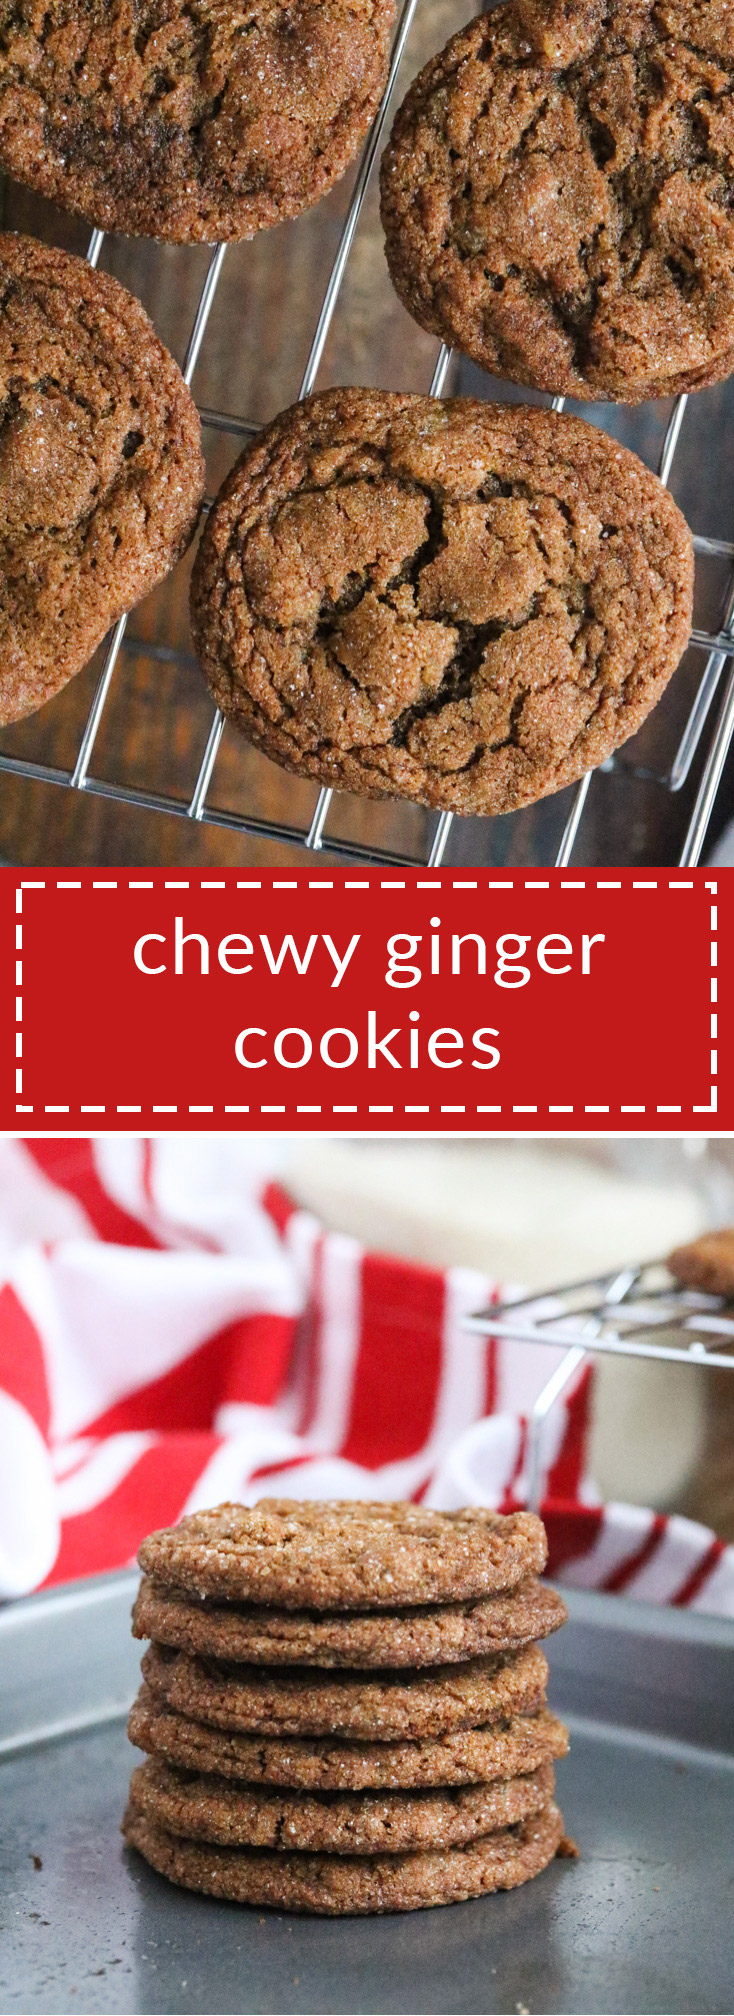 these chewy ginger cookies are delicious and they ship/keep well, so they are perfect for holiday baking, gifts, and cookie swaps.  recipe doubles easily.